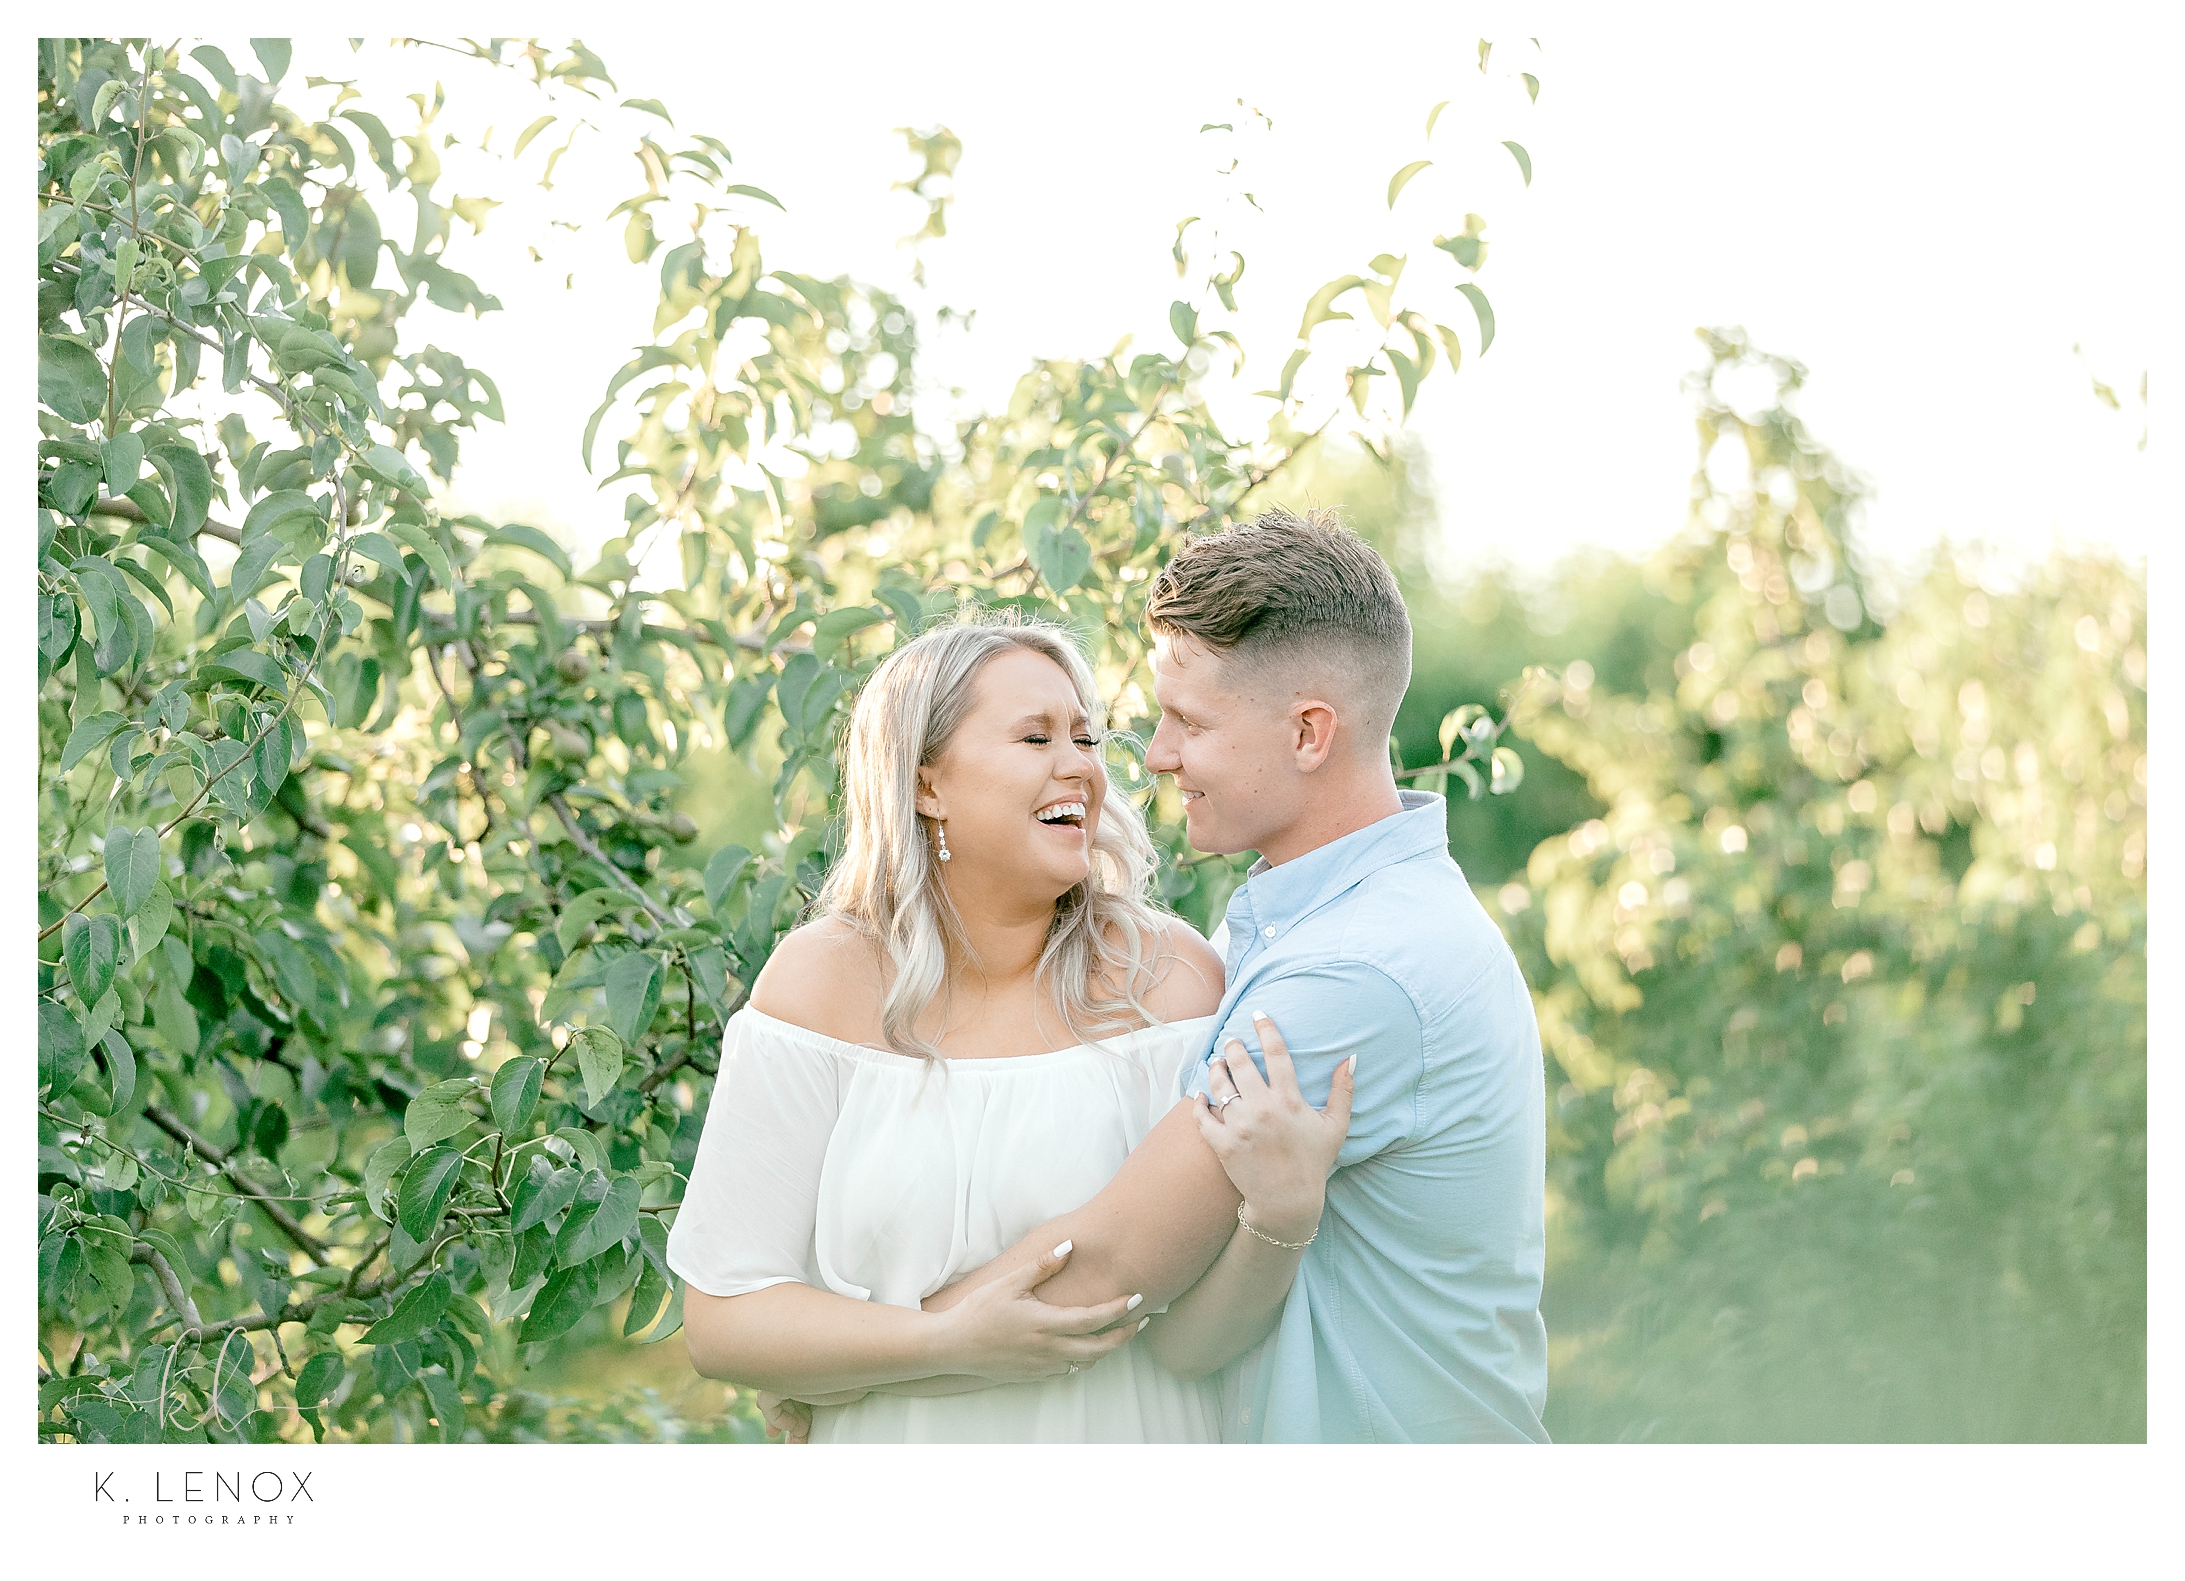 Light and Airy Wedding Photographer shoots a light and airy engagement photos at Alyson's Orchard